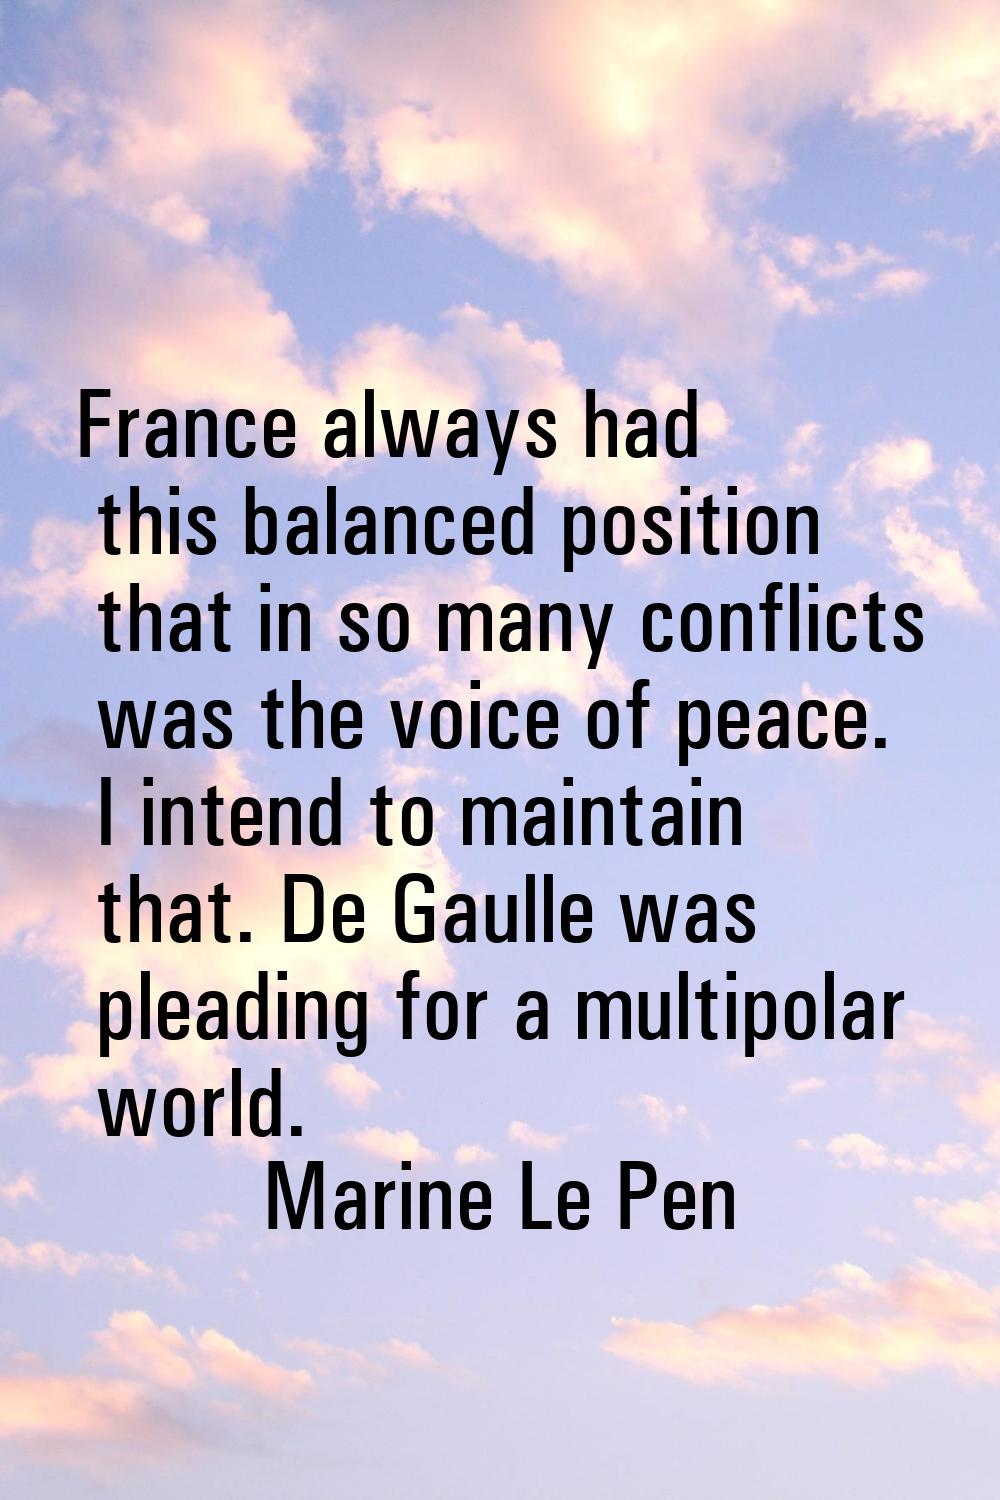 France always had this balanced position that in so many conflicts was the voice of peace. I intend